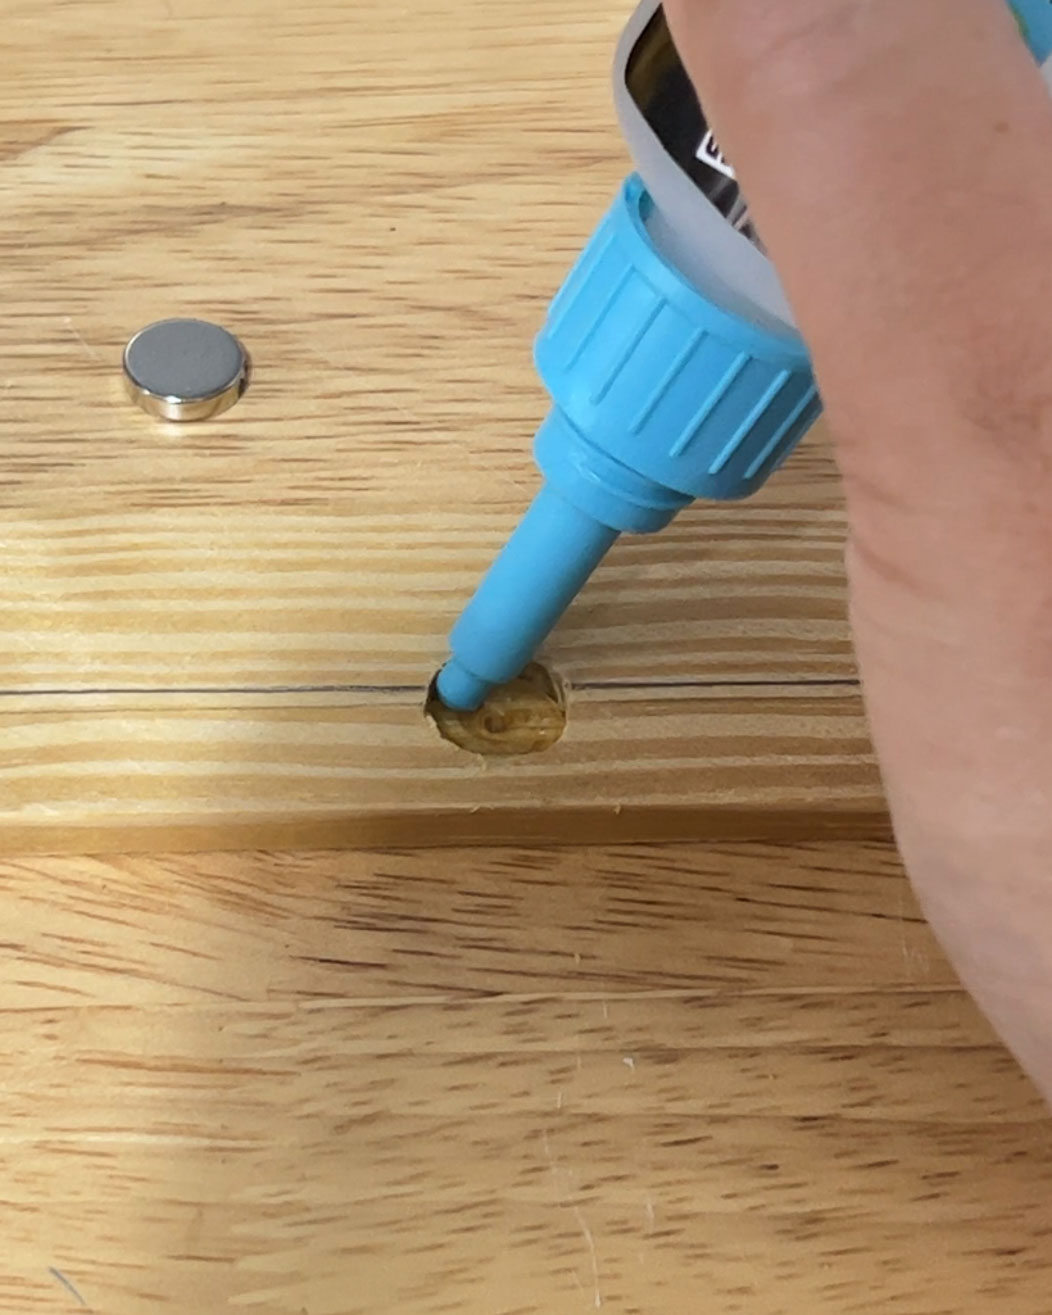 gluing small magnets into wood strip for magnetic poster hangers